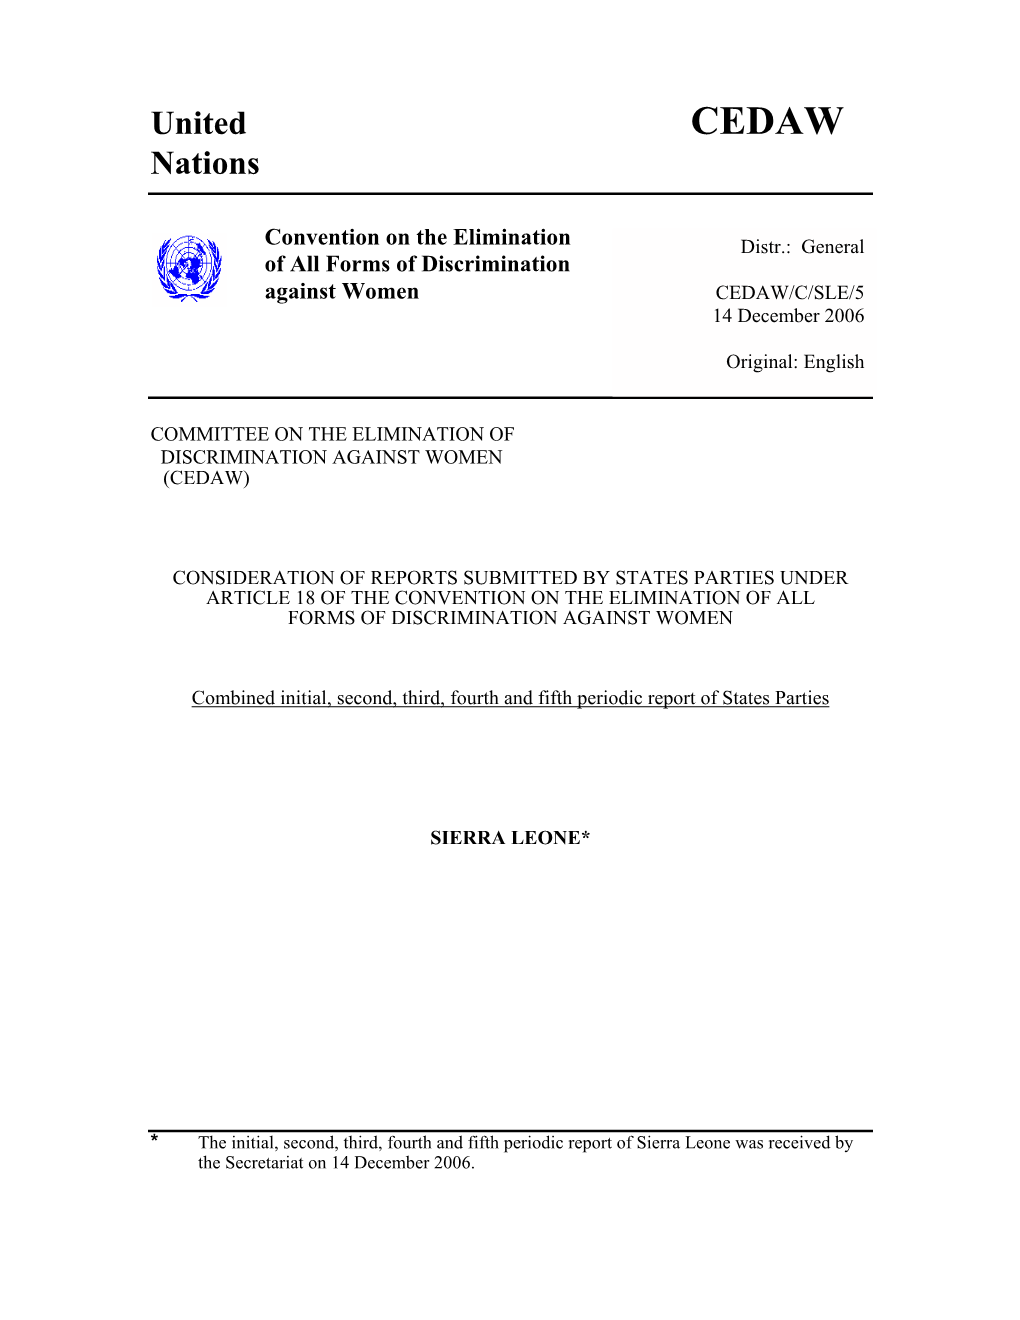 CEDAW Nations